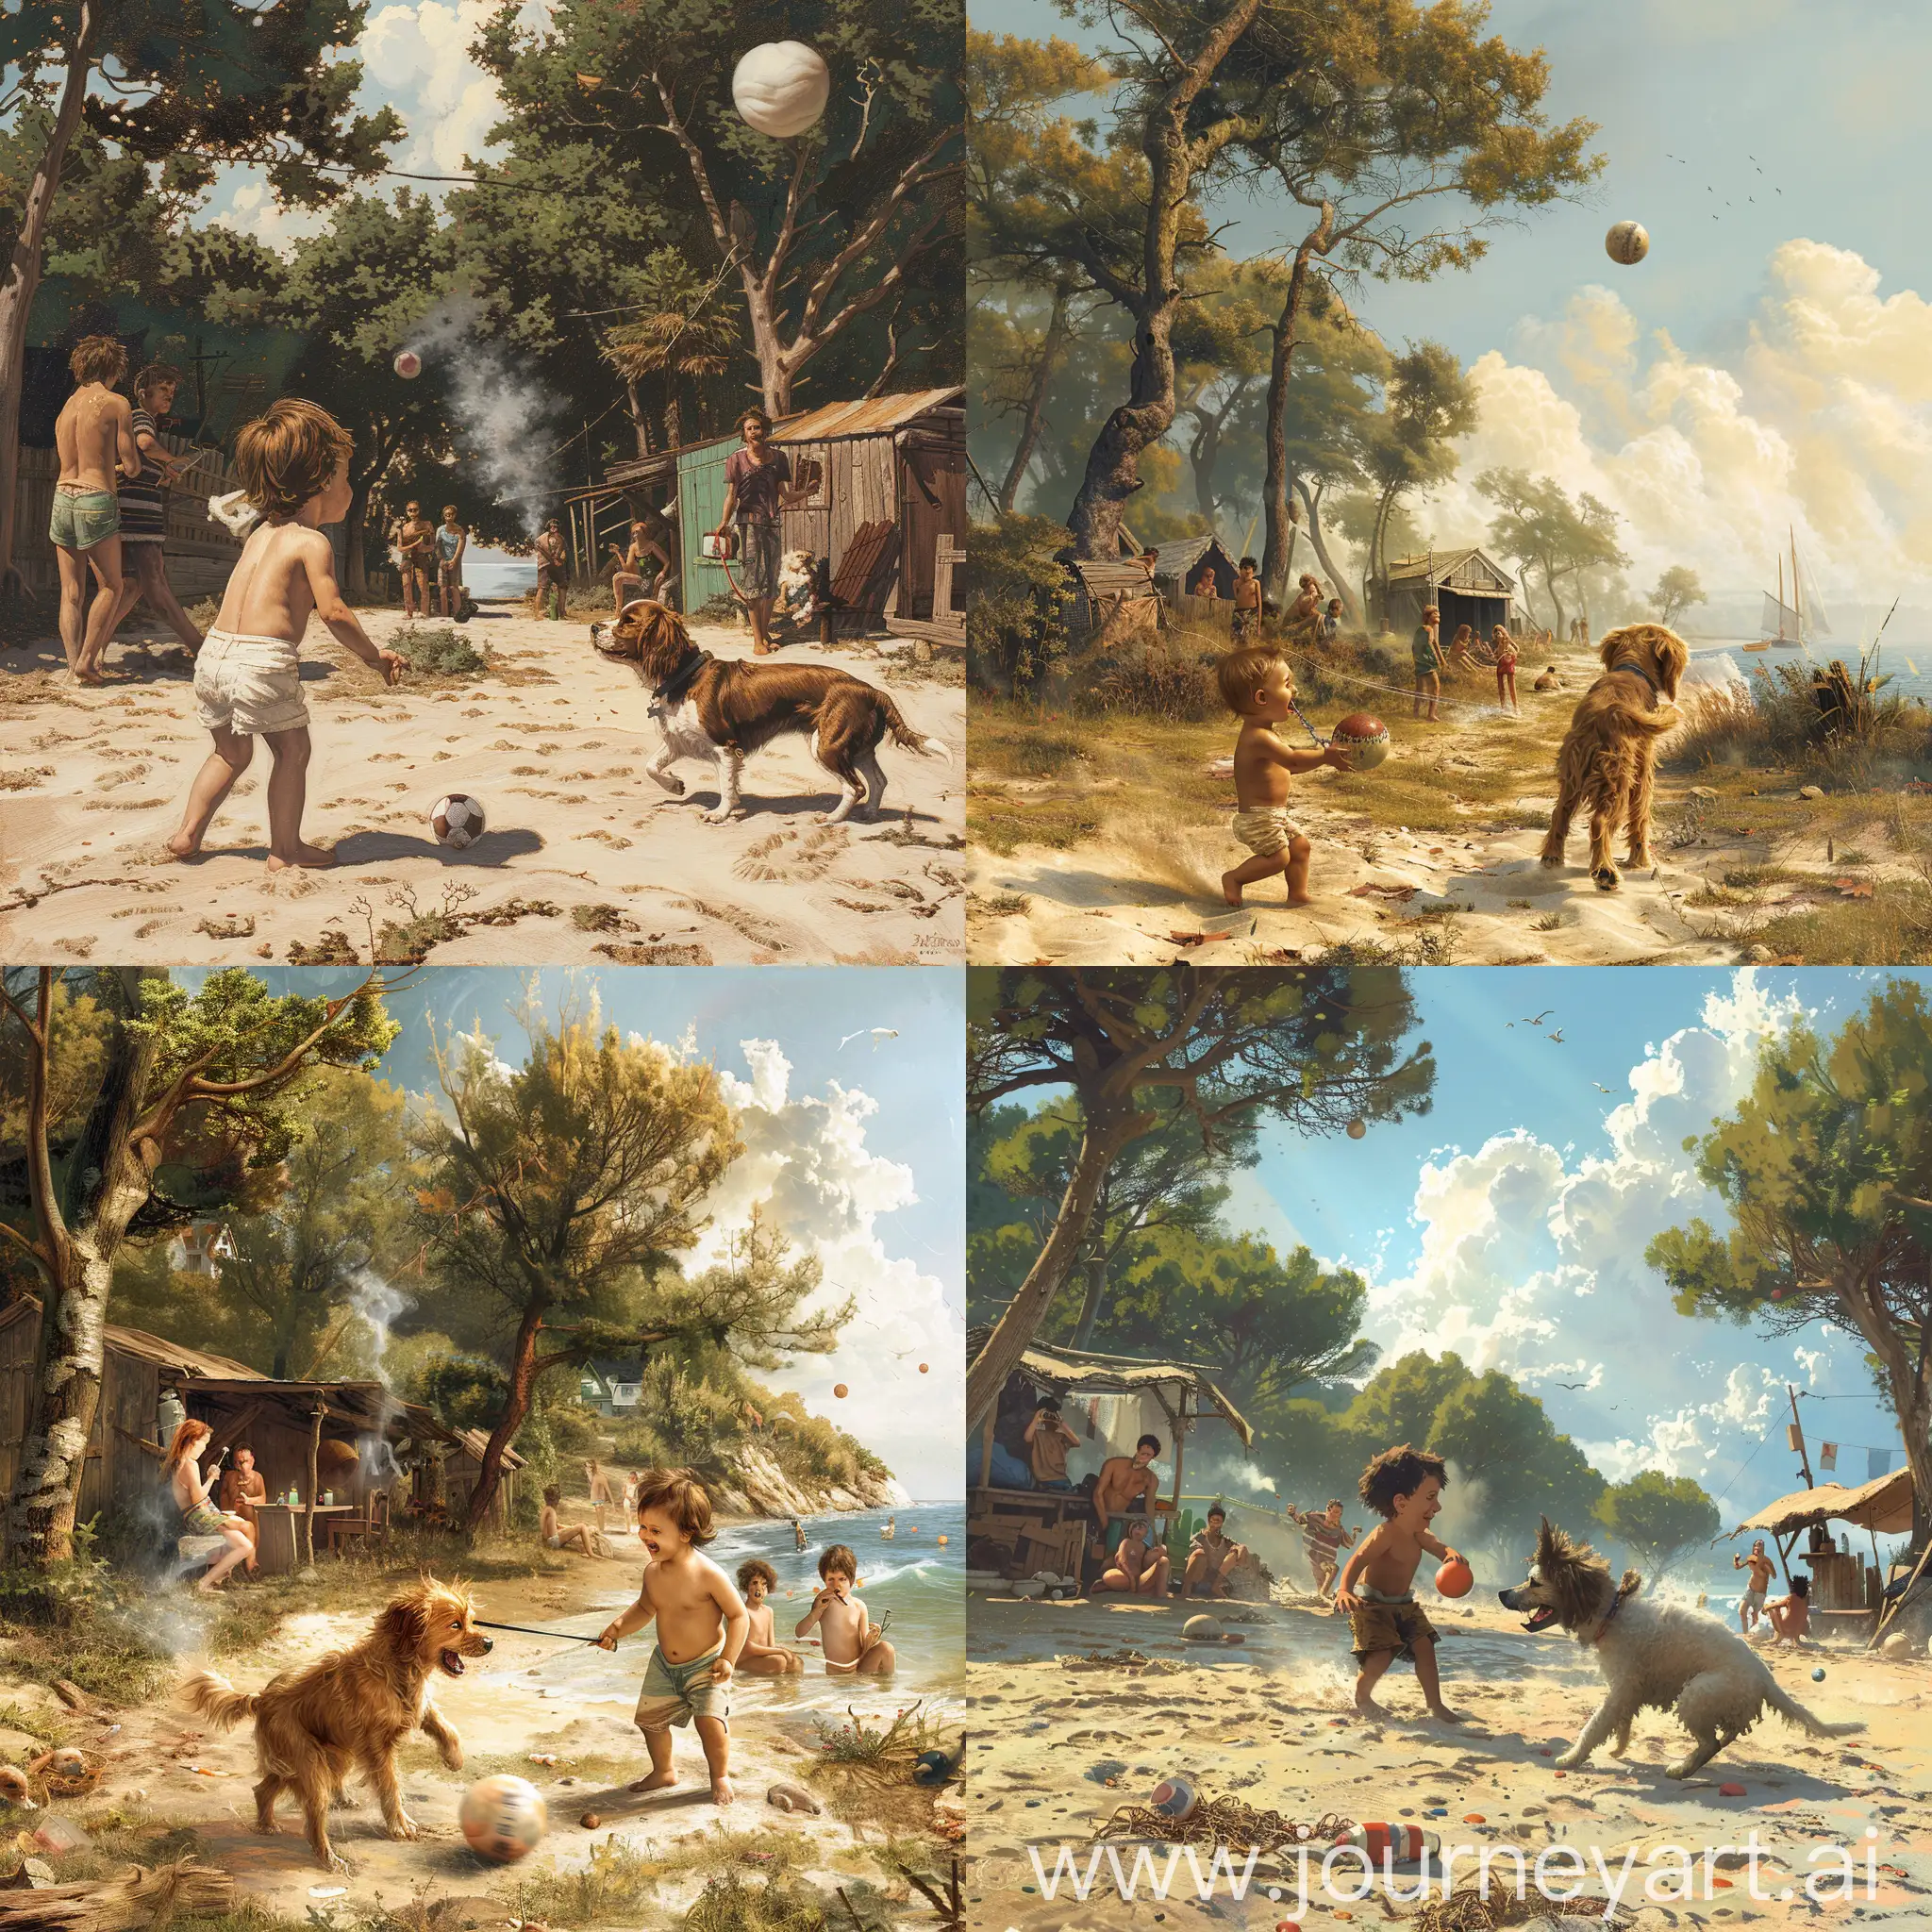 a young child and a dog are  playing with a ball in the coast of a small sea village, in the background there are trees, some wooden shelters, as wel as, a crew of young people lauging, smoking and drinking, the atmospehe is blissful and musical